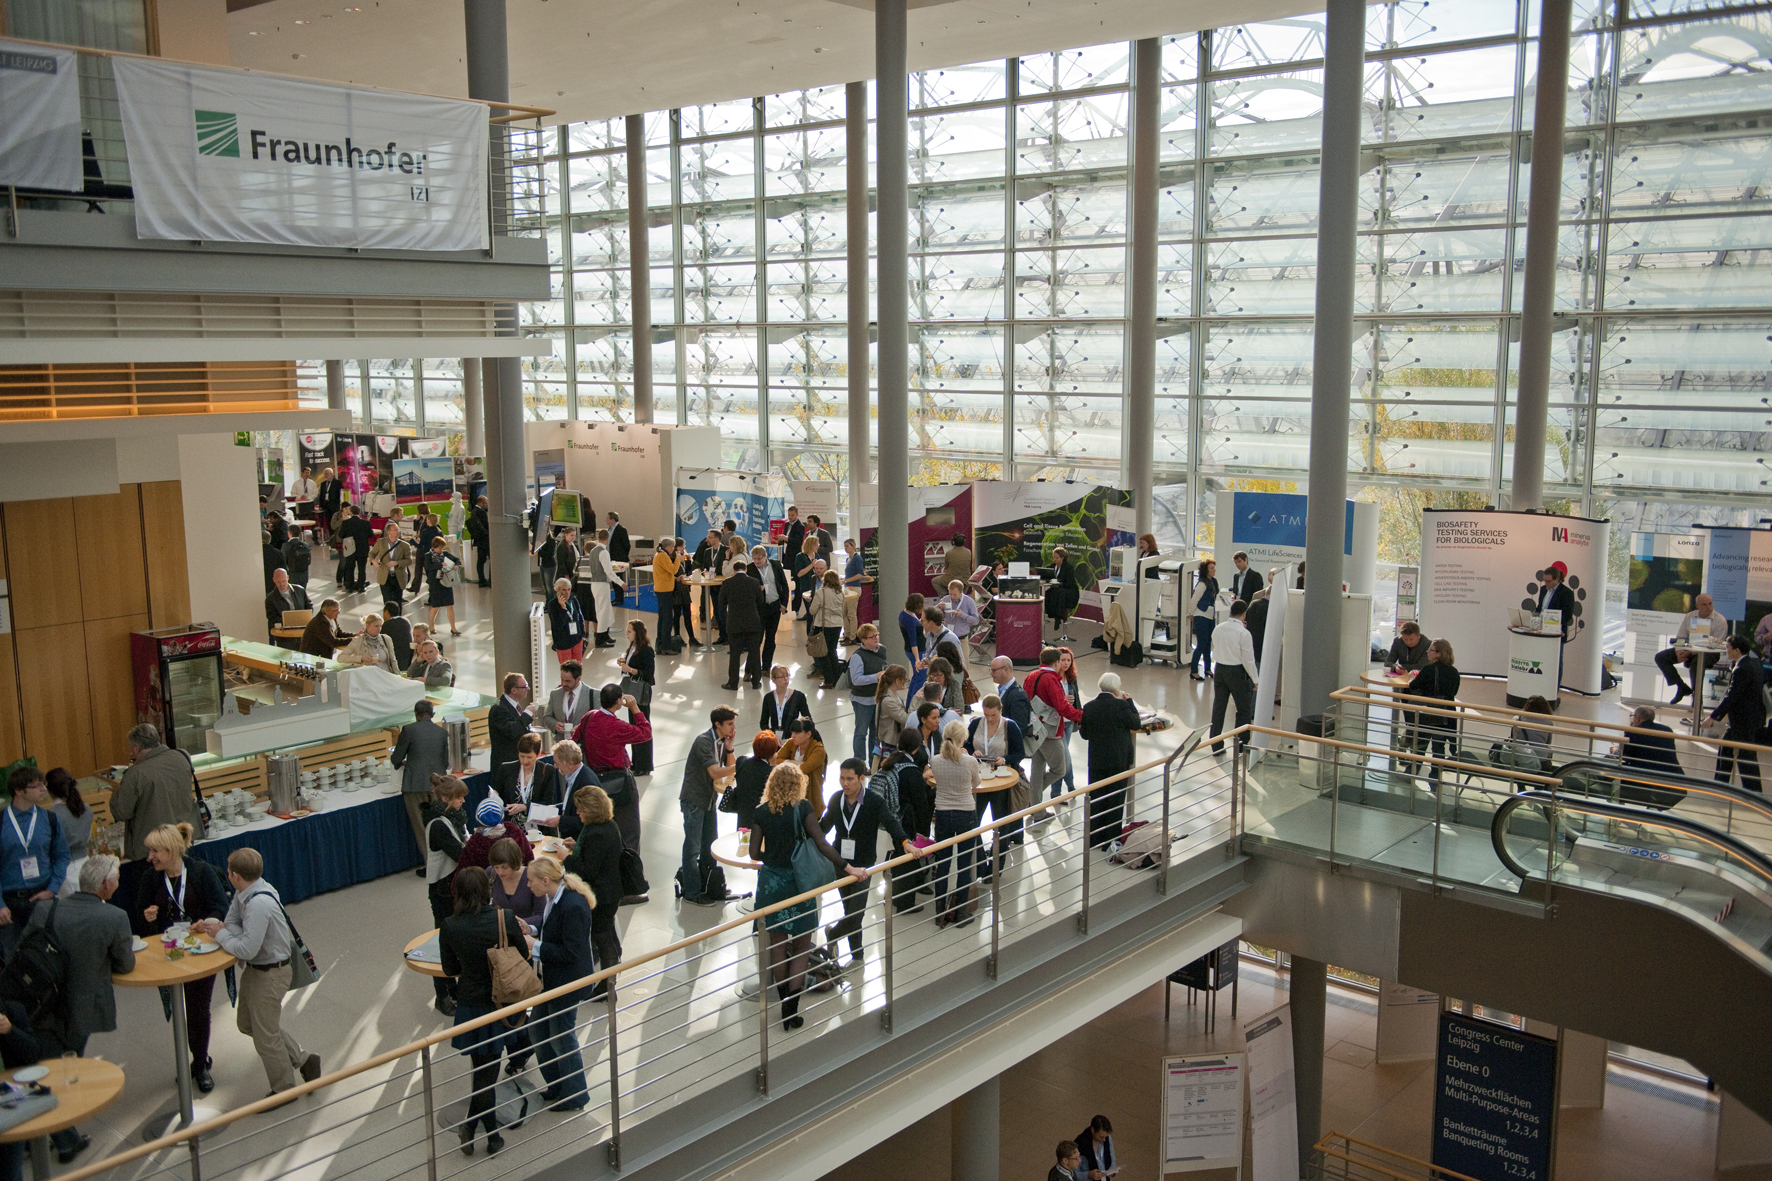 Exhibitors and guests at the World Conference on Regenerative Medicine 2013.